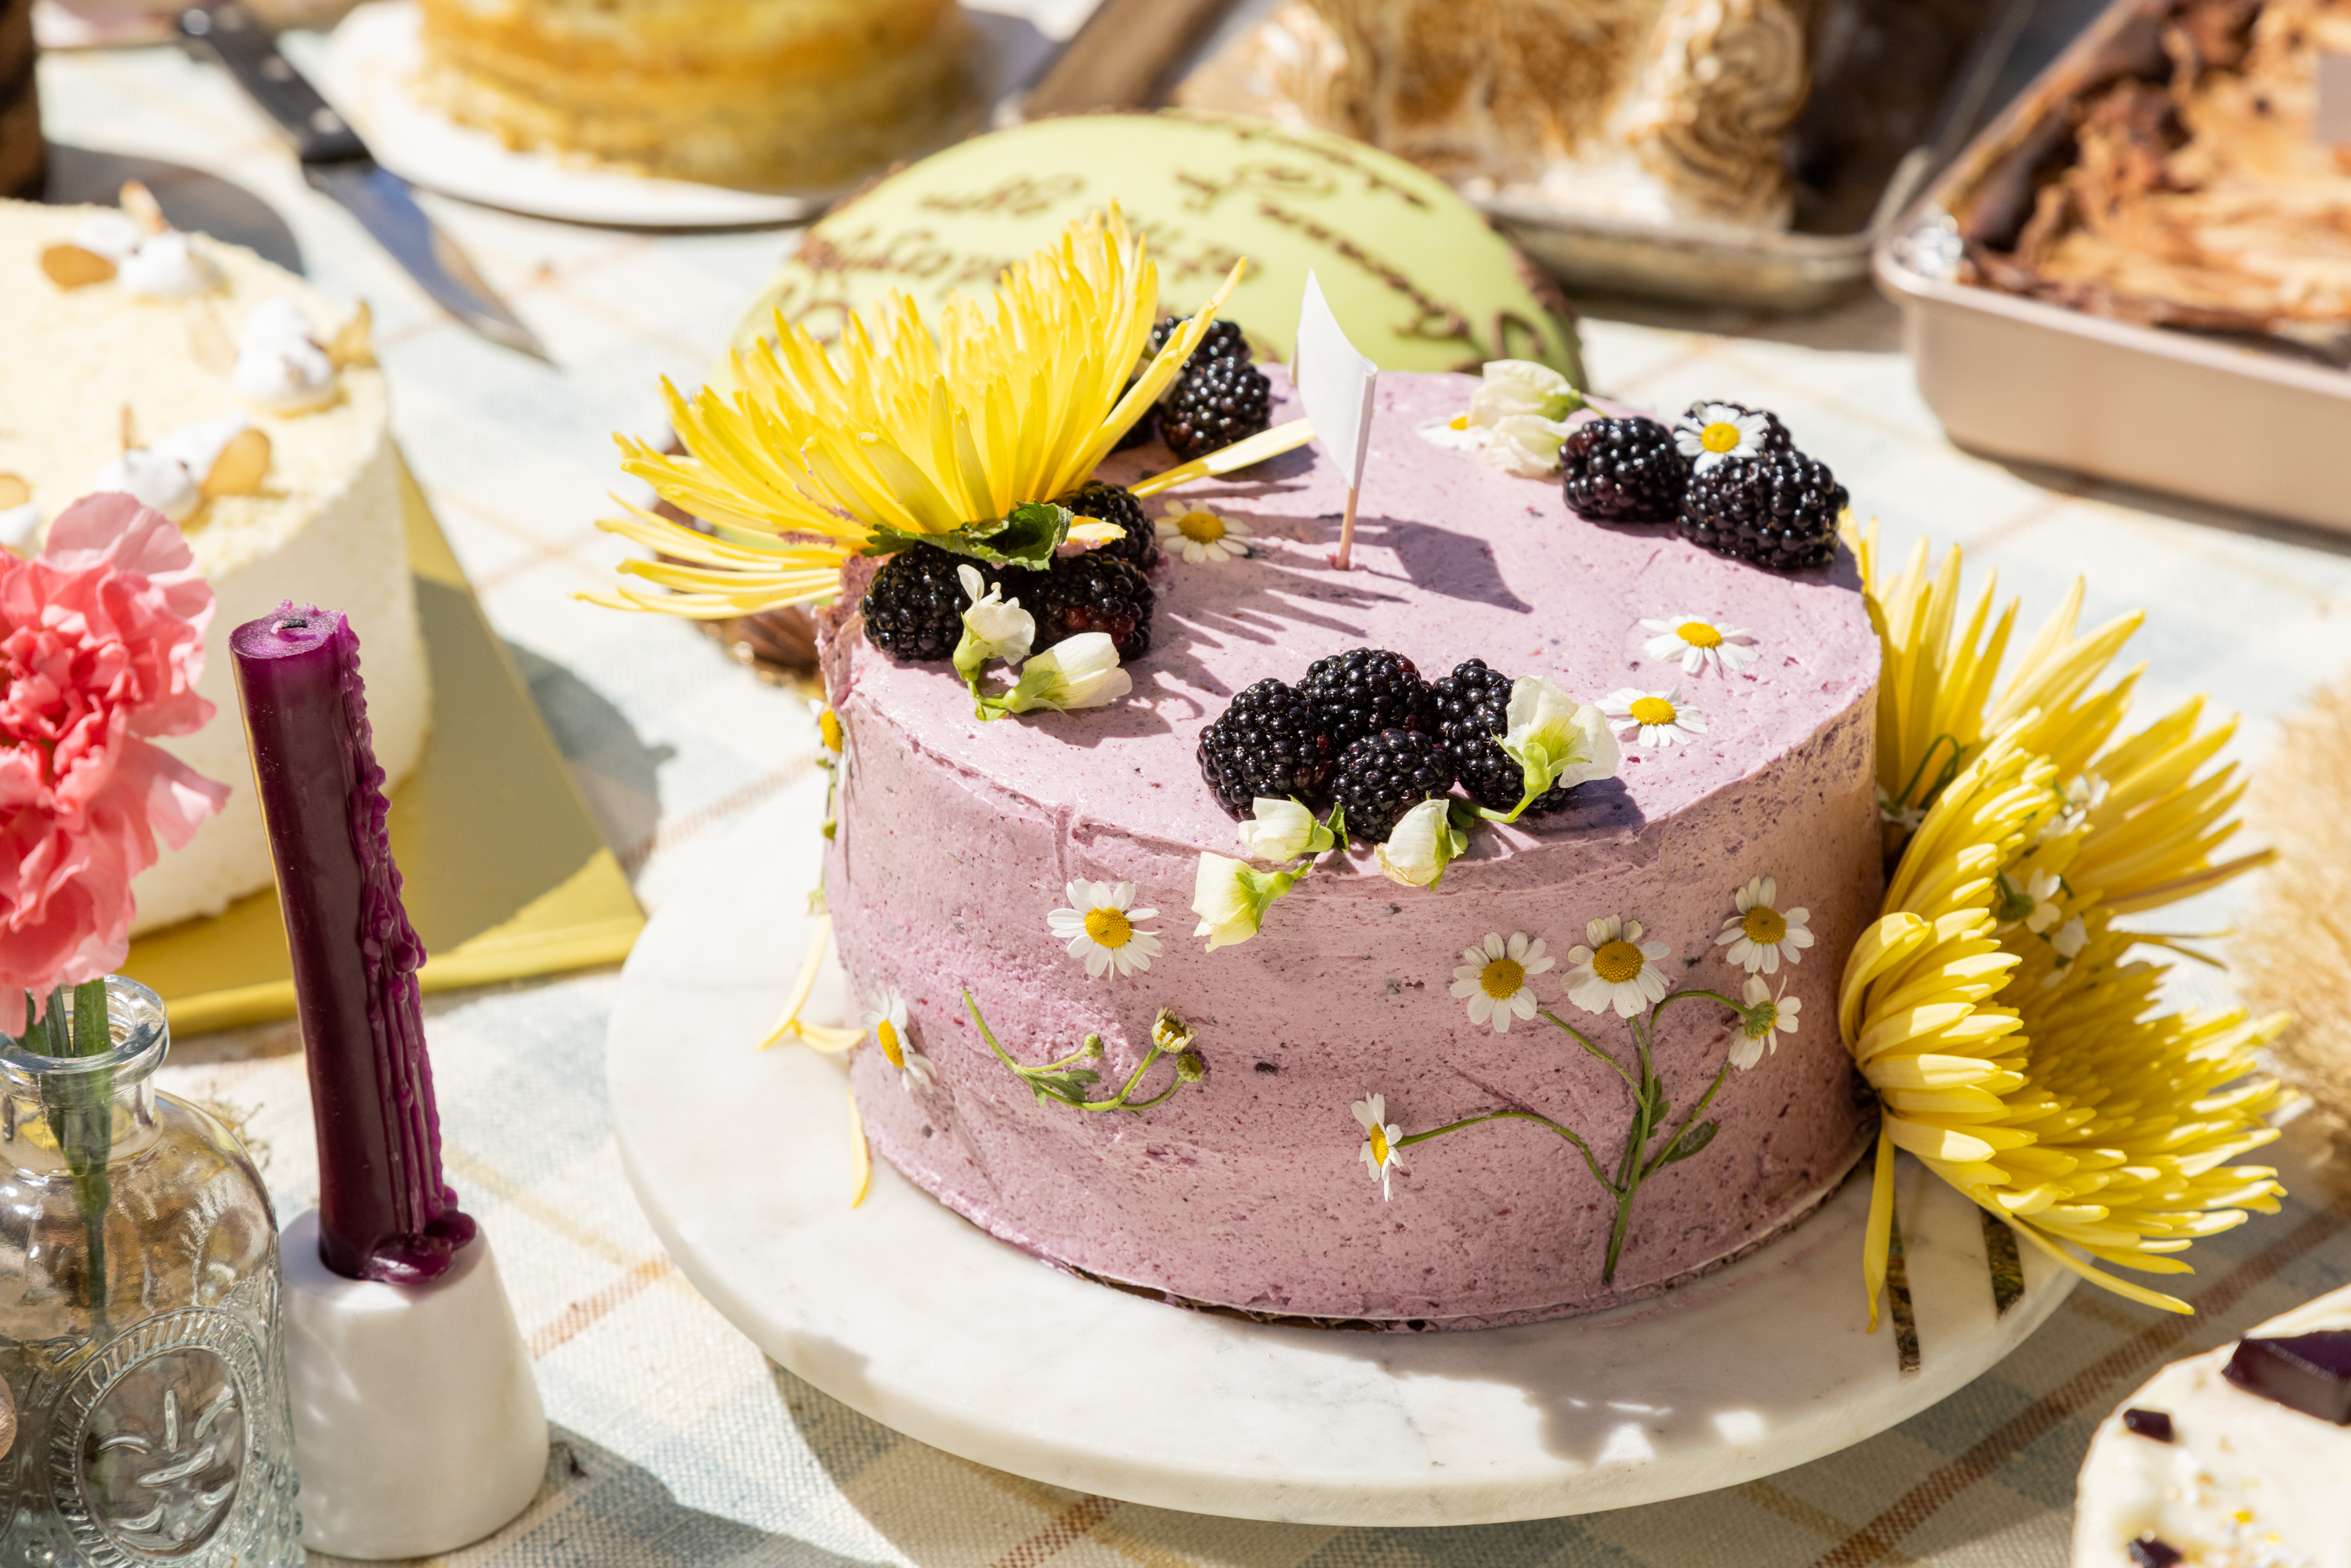 A purple cake adorned with blackberries, chamomile flowers, next to bright yellow blooms on a sunny table.